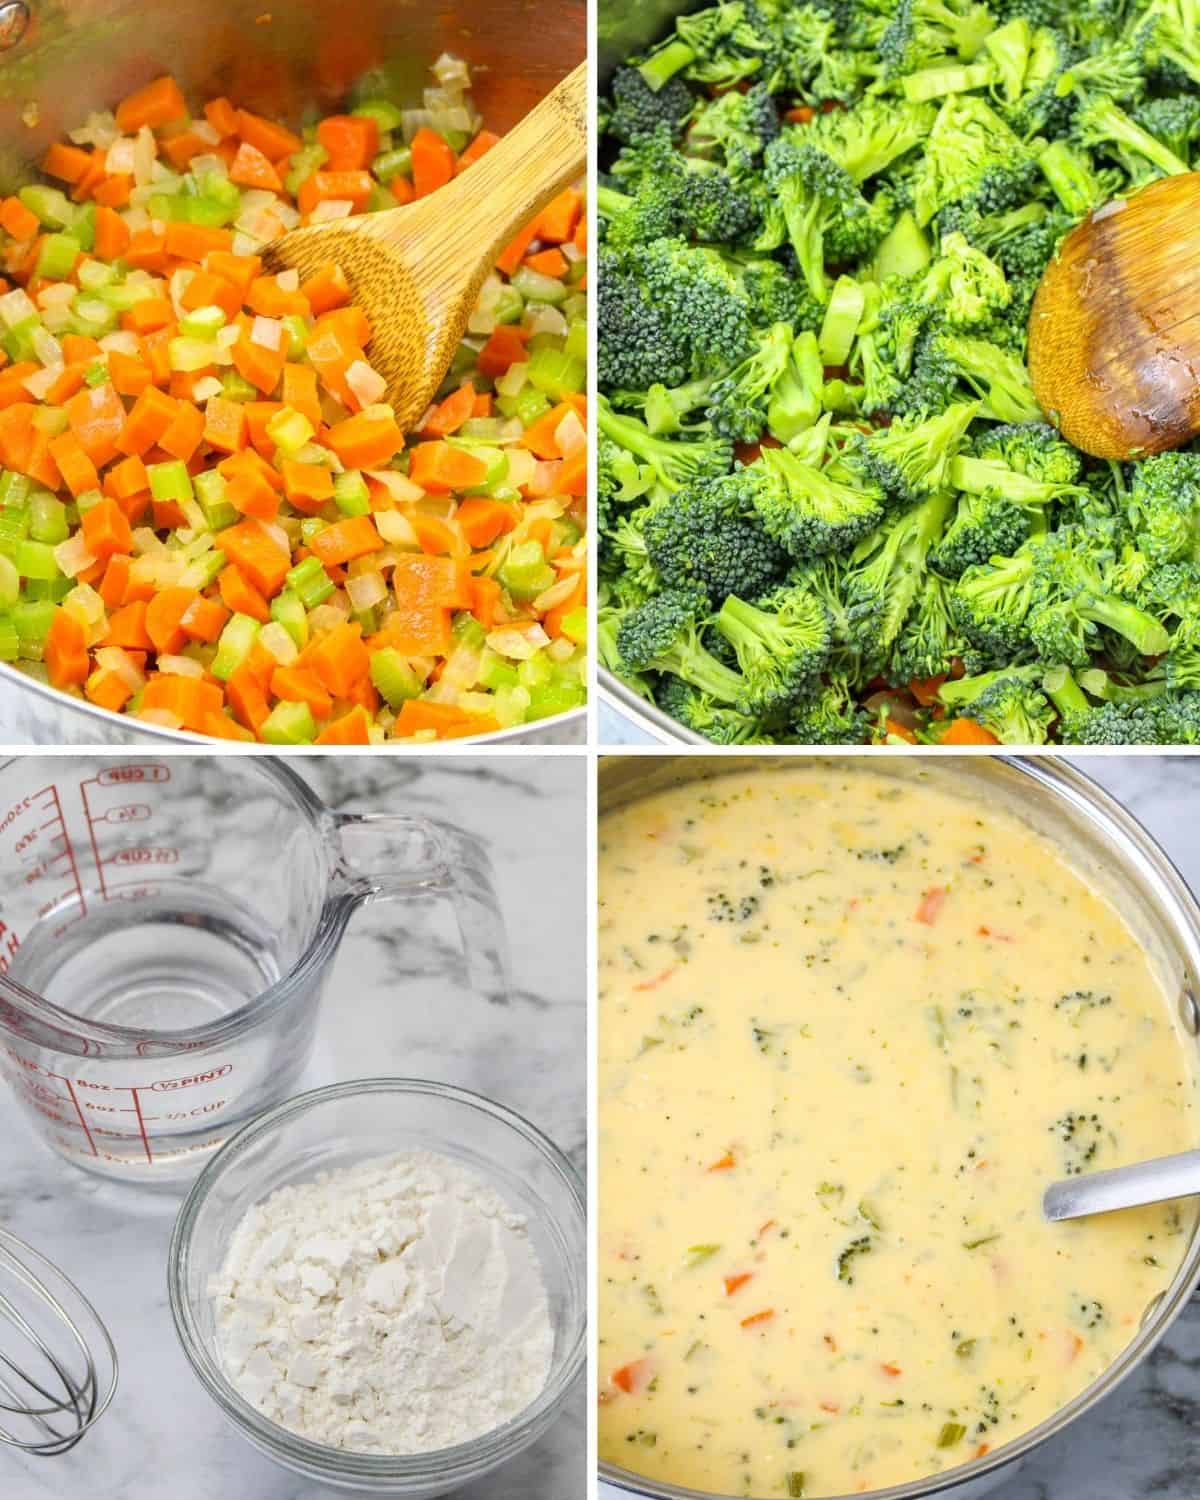 Steps to make Broccoli Beer Cheese Soup. 